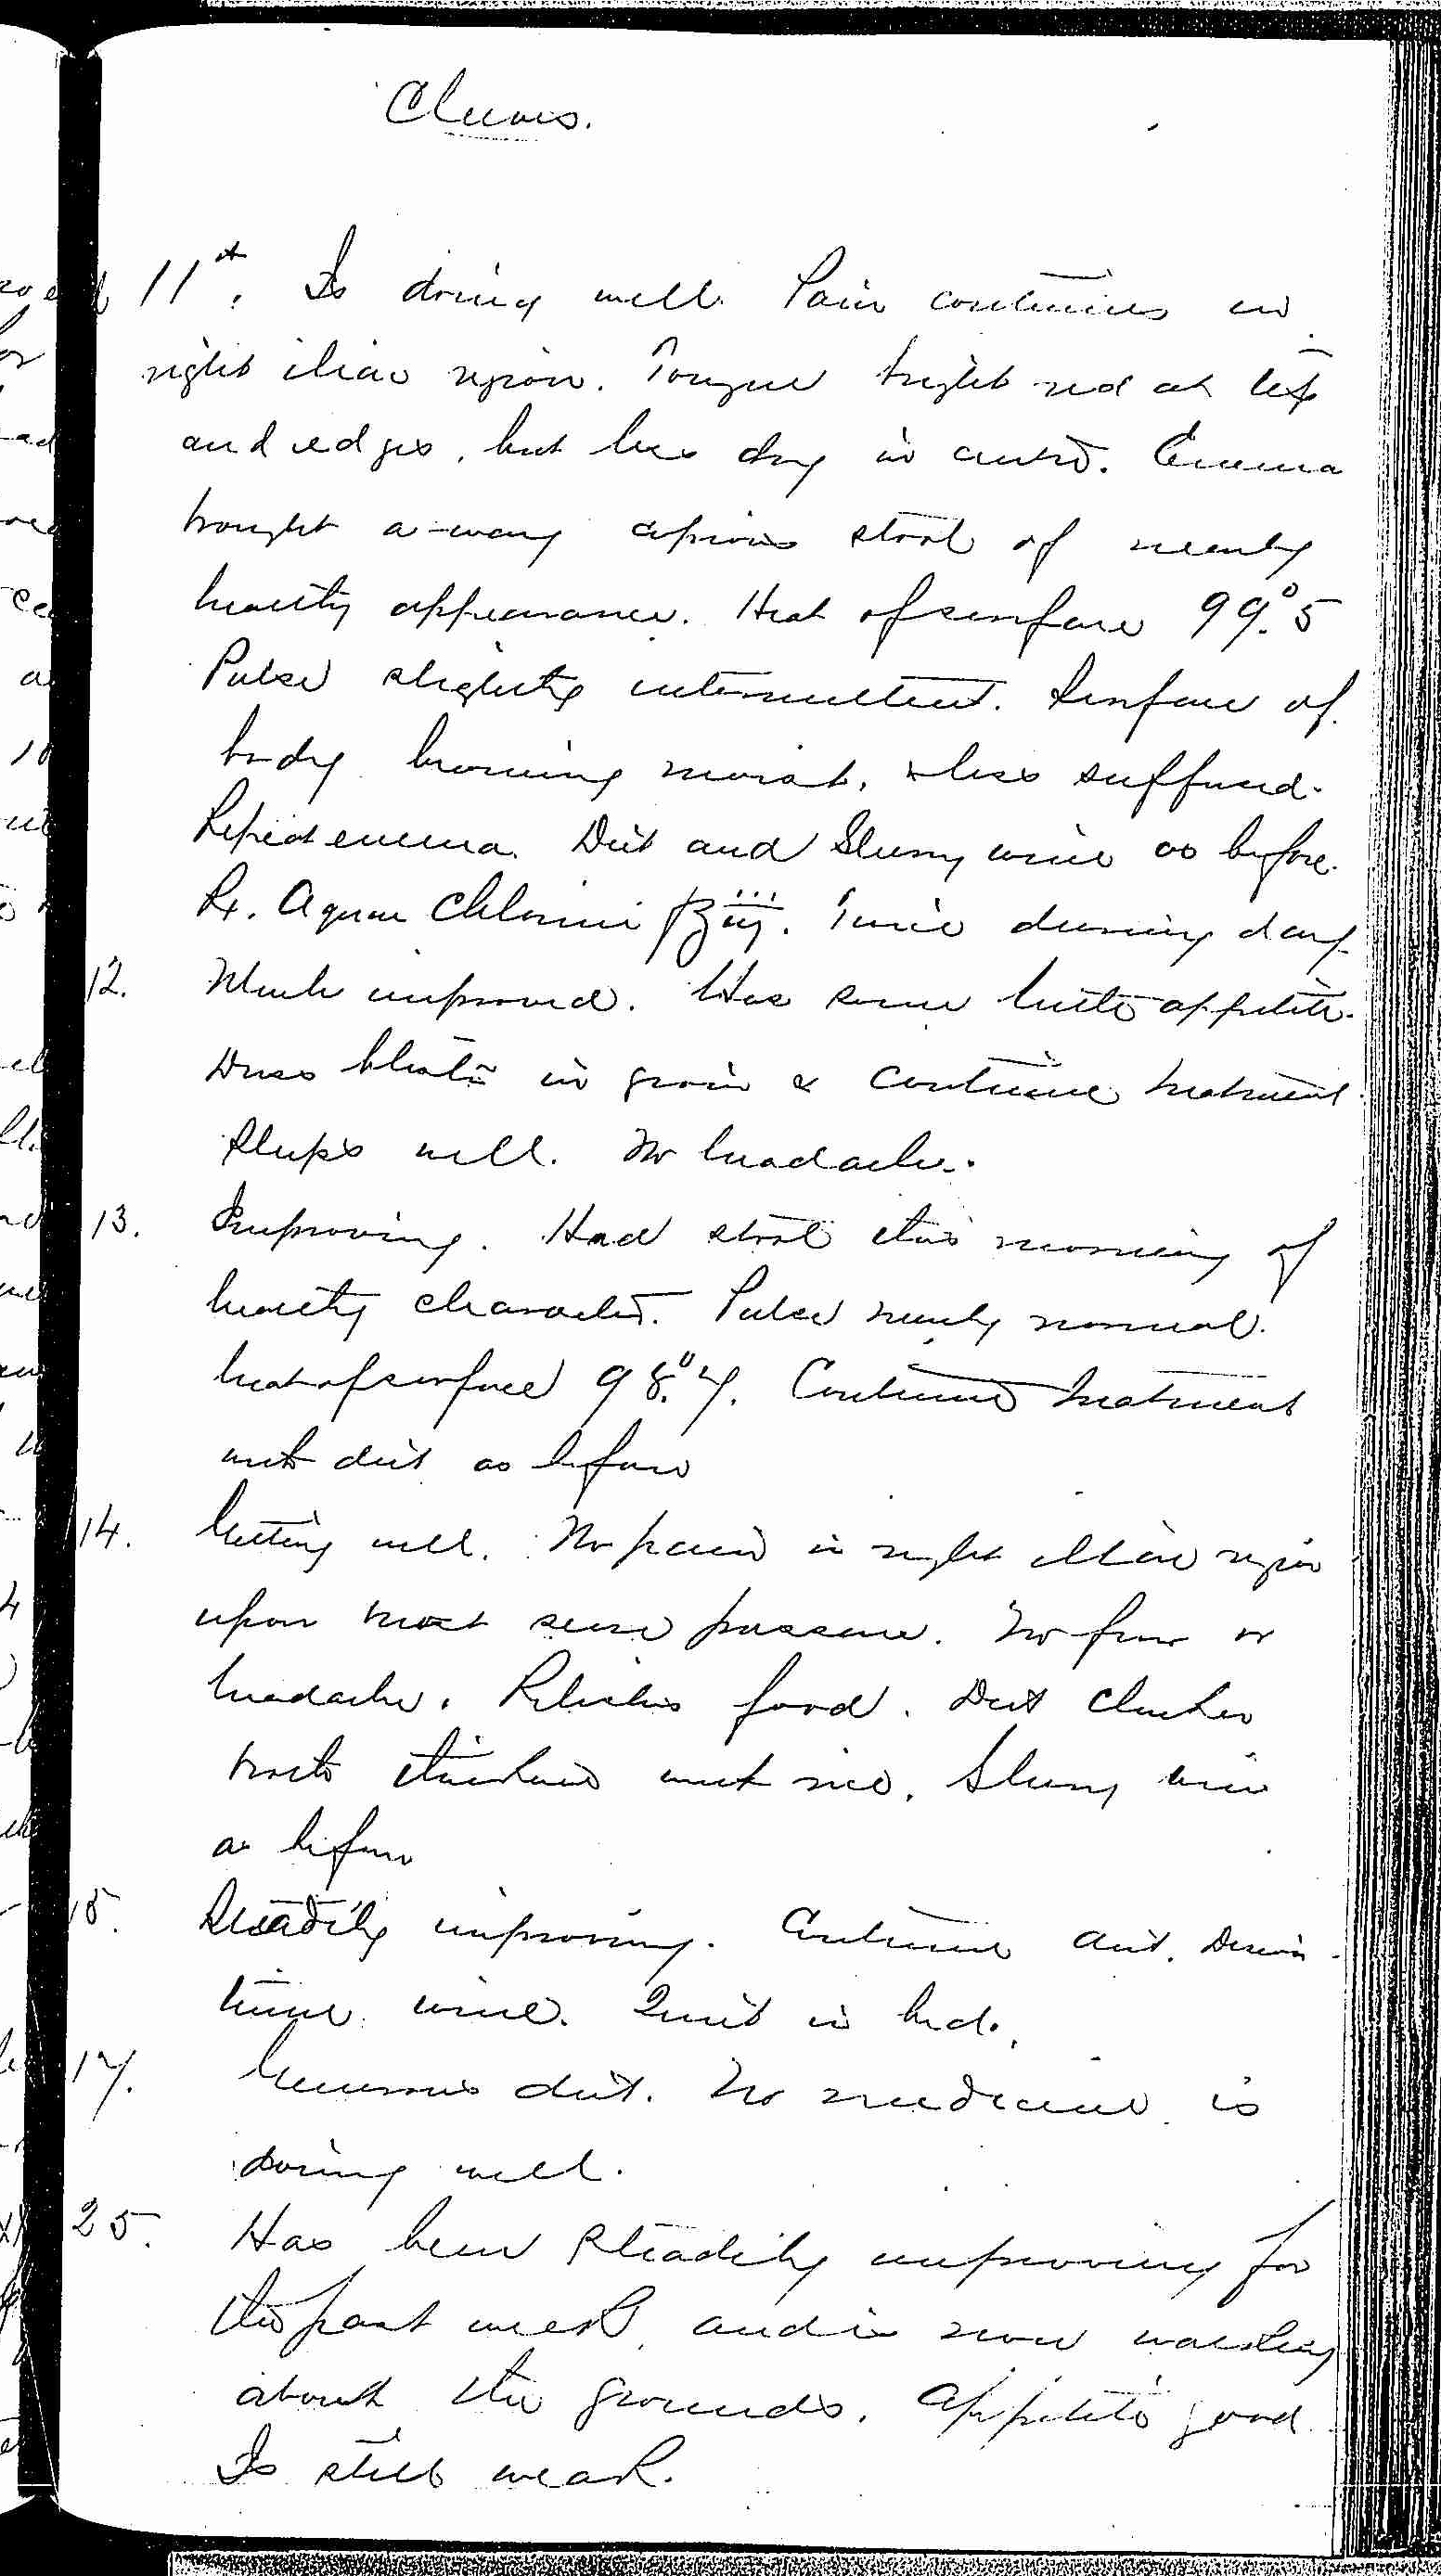 Entry for Arnold Cleeves (page 3 of 4) in the log Hospital Tickets and Case Papers - Naval Hospital - Washington, D.C. - 1868-69